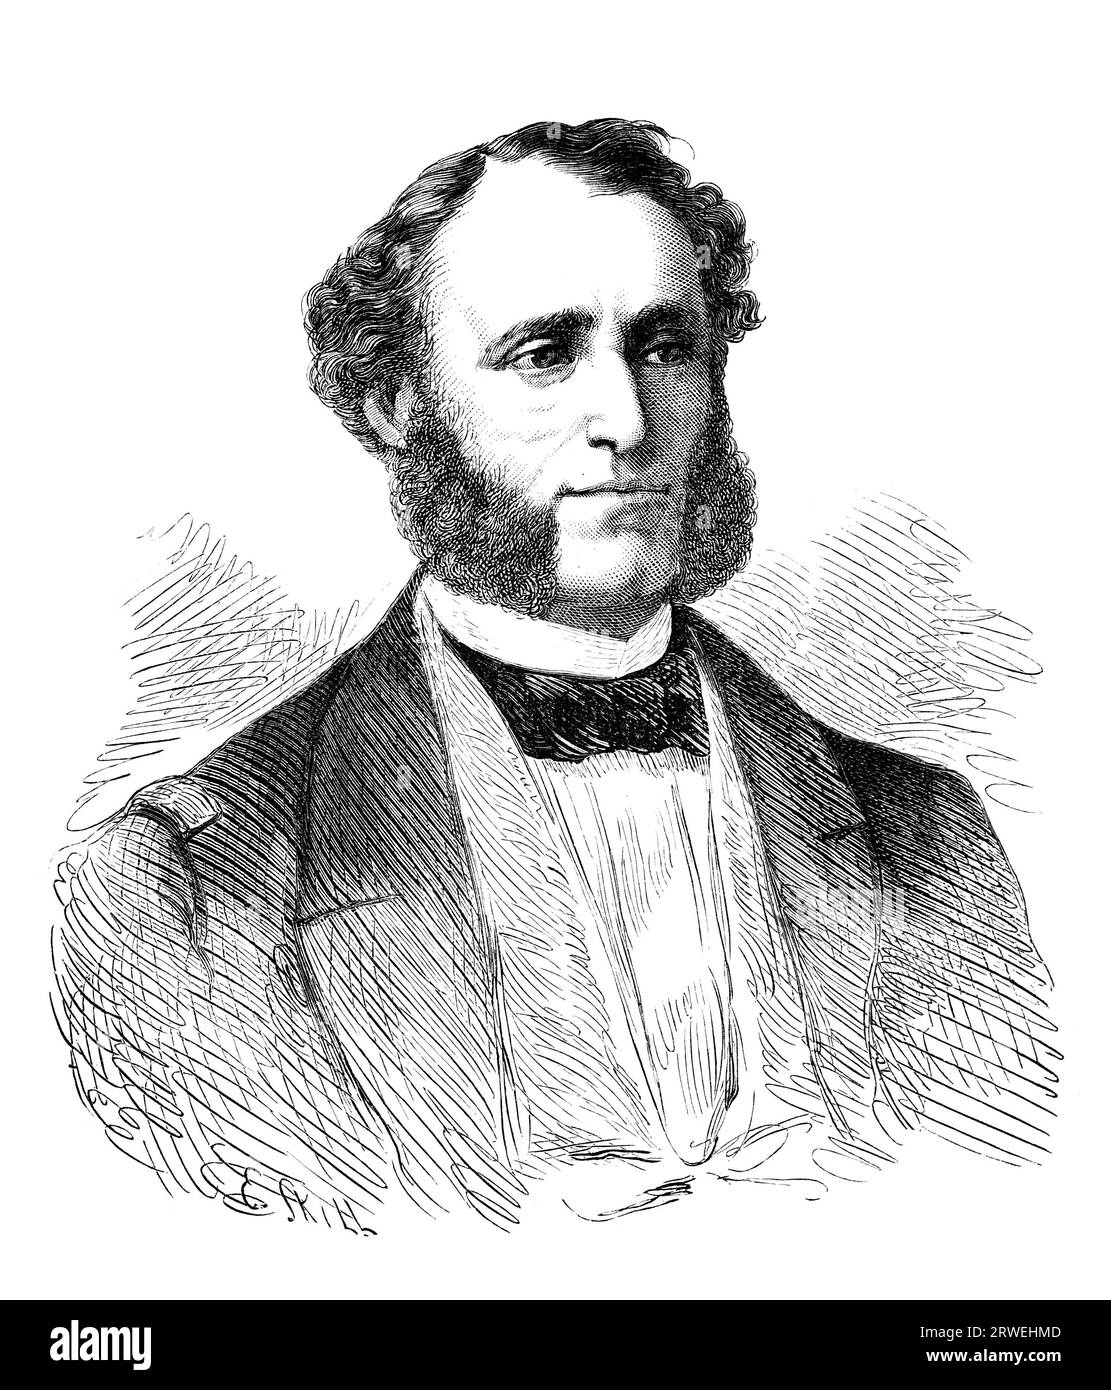 Erik Magnus af Klint (1813-1877), swedish military person and politician. Old engraving from a magazine printed in 1866 Stock Photo